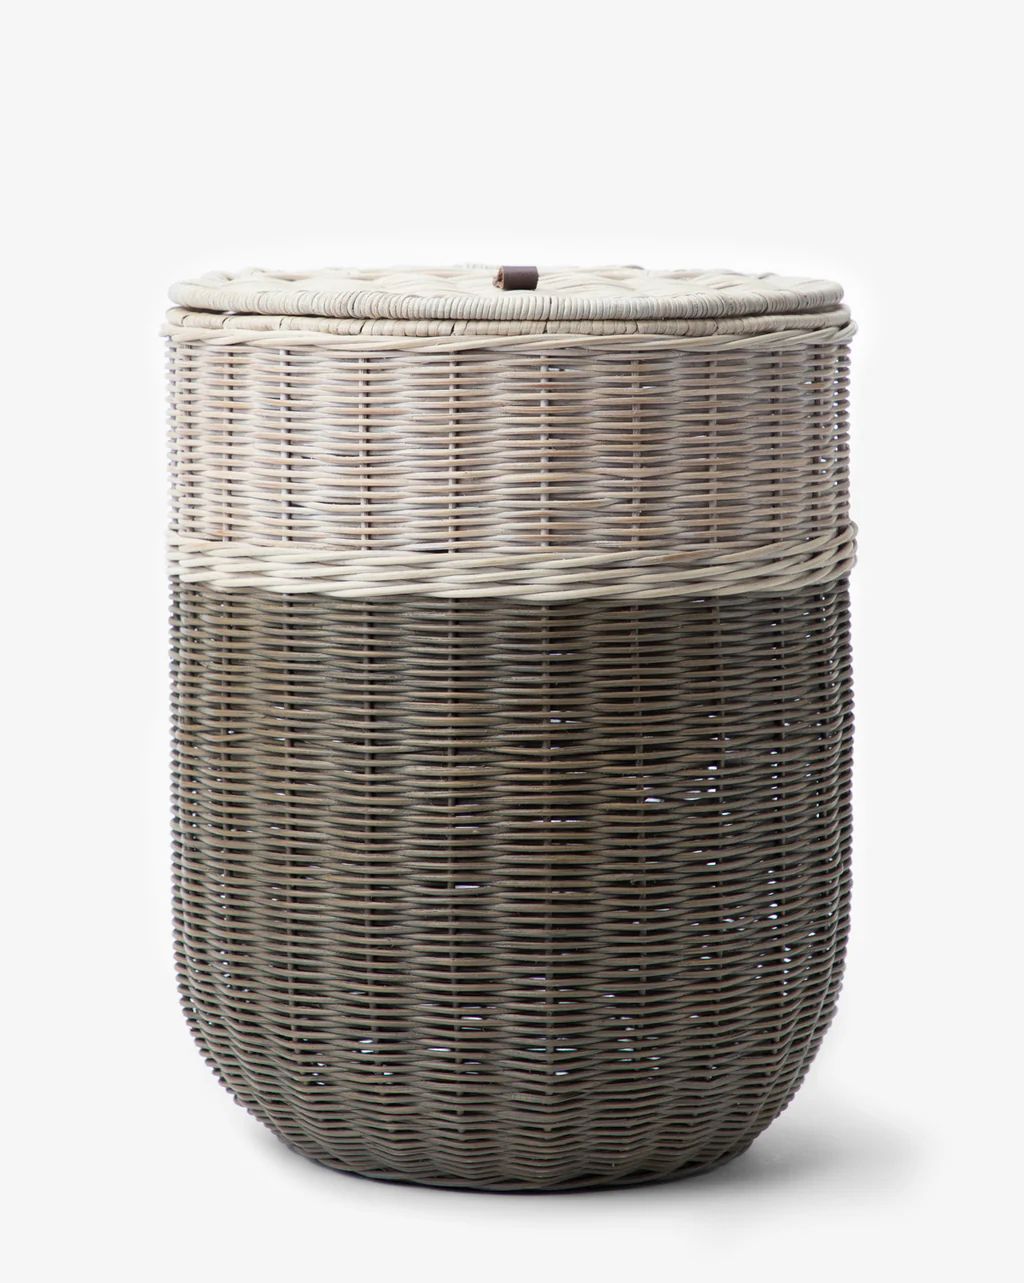 Cannon Basket | McGee & Co. (US)